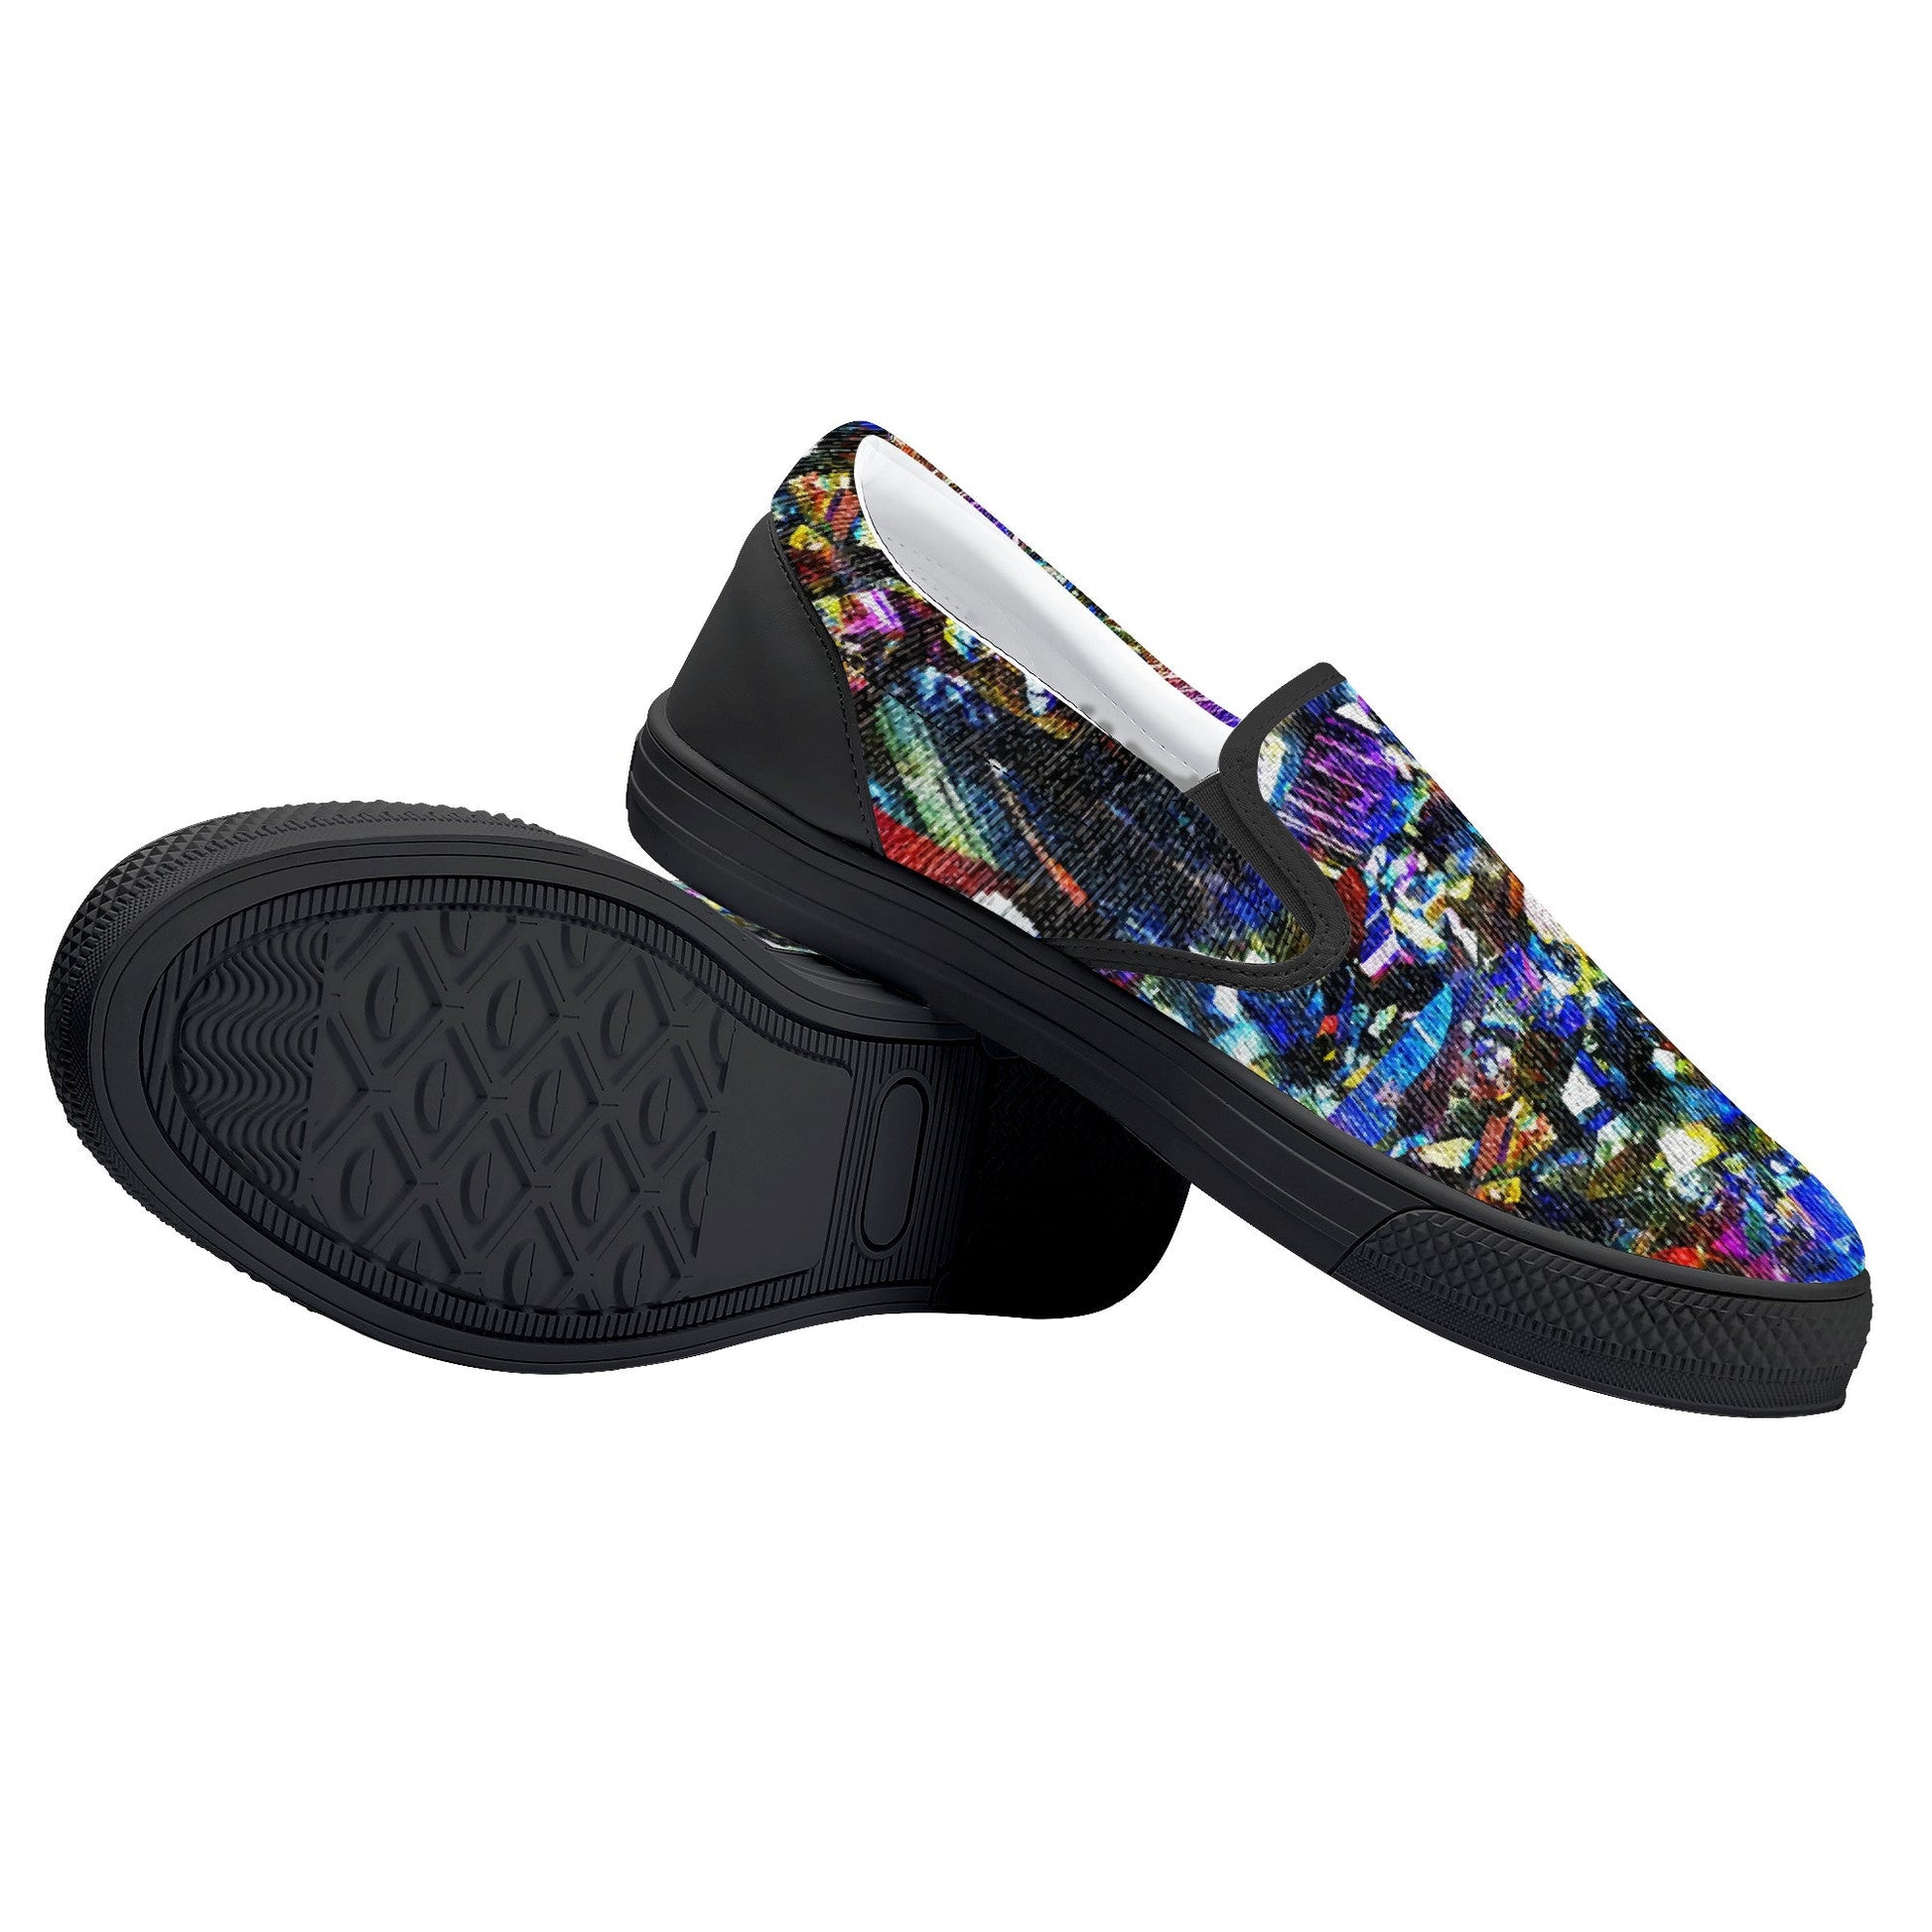 RNBW RCK Slip-on Shoes | CANAANWEAR | Shoes | slip on shoes